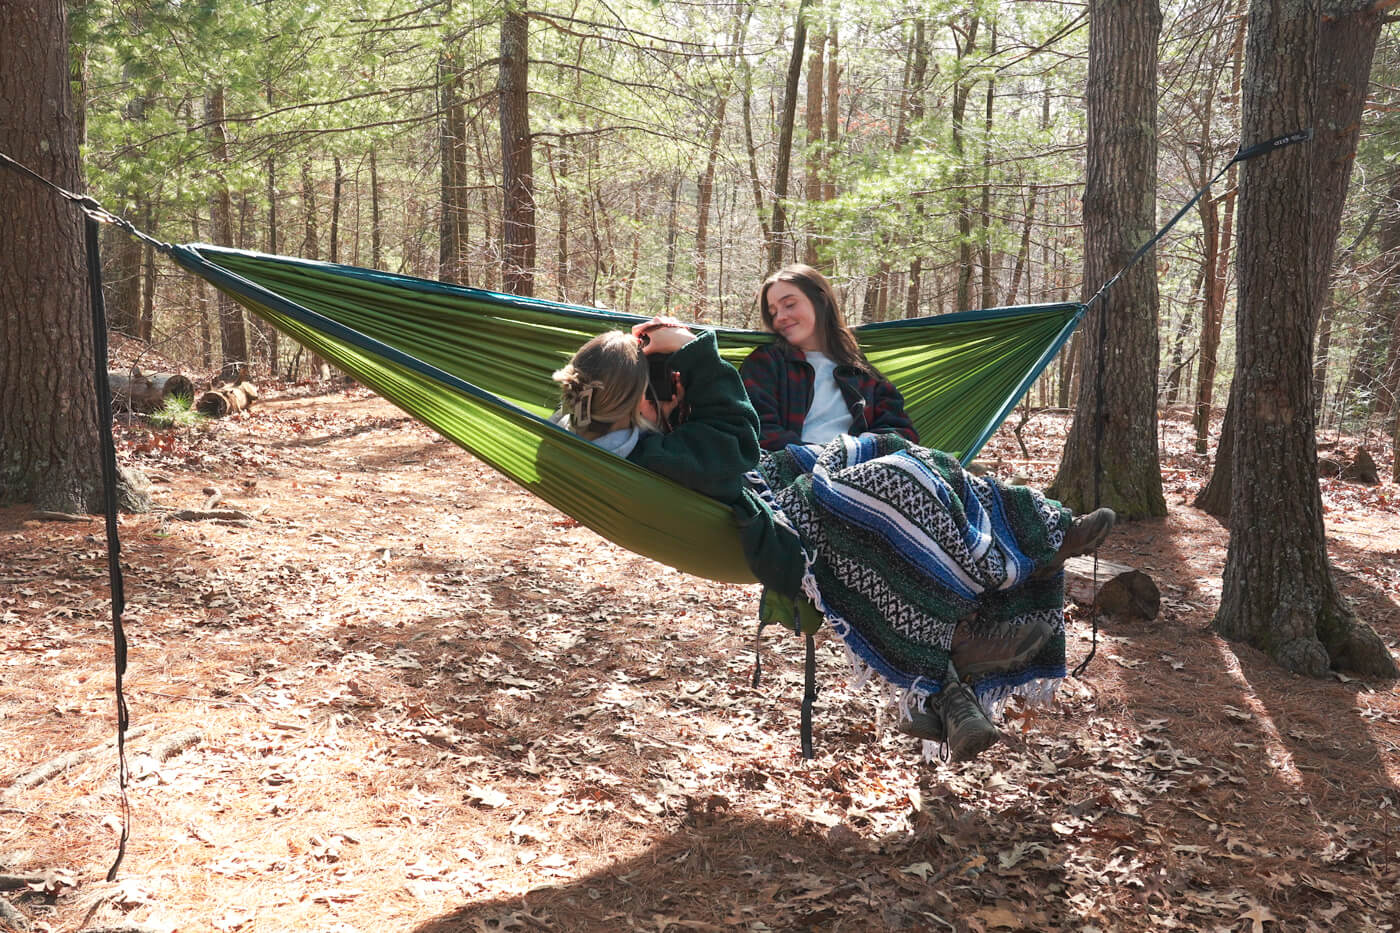 3 Outdoor Date Ideas With Your ENO Gear